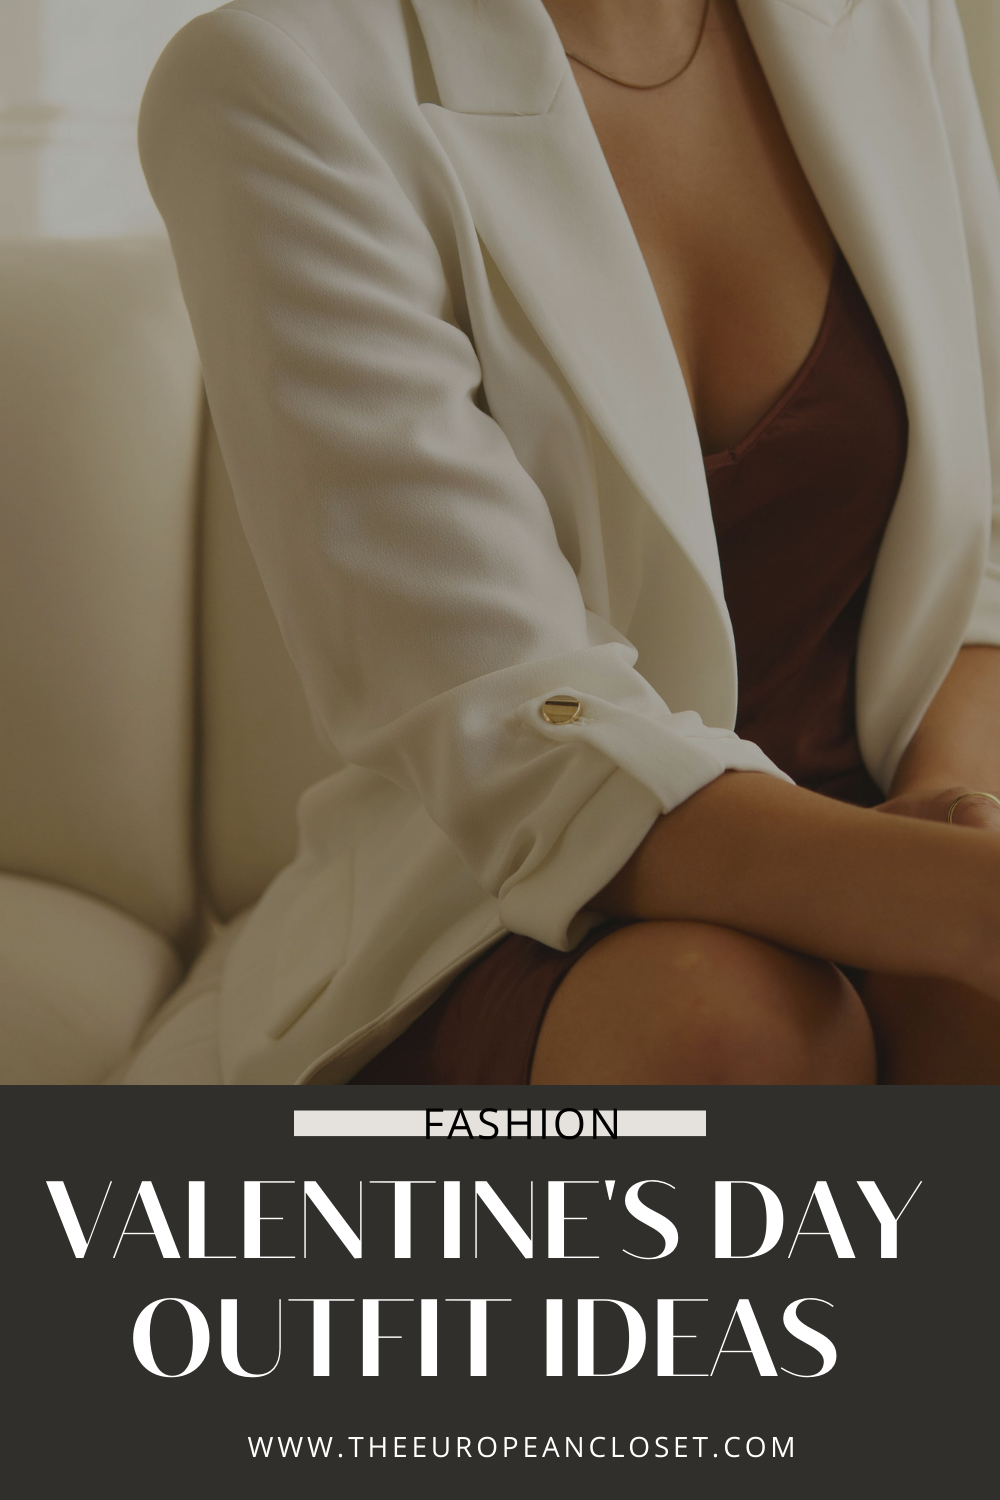 February is here which means Valentines Day is upon us. Today I thought I'd share 5 Valentines Day Outfits you can wear pretty much anywhere you might decide to go.